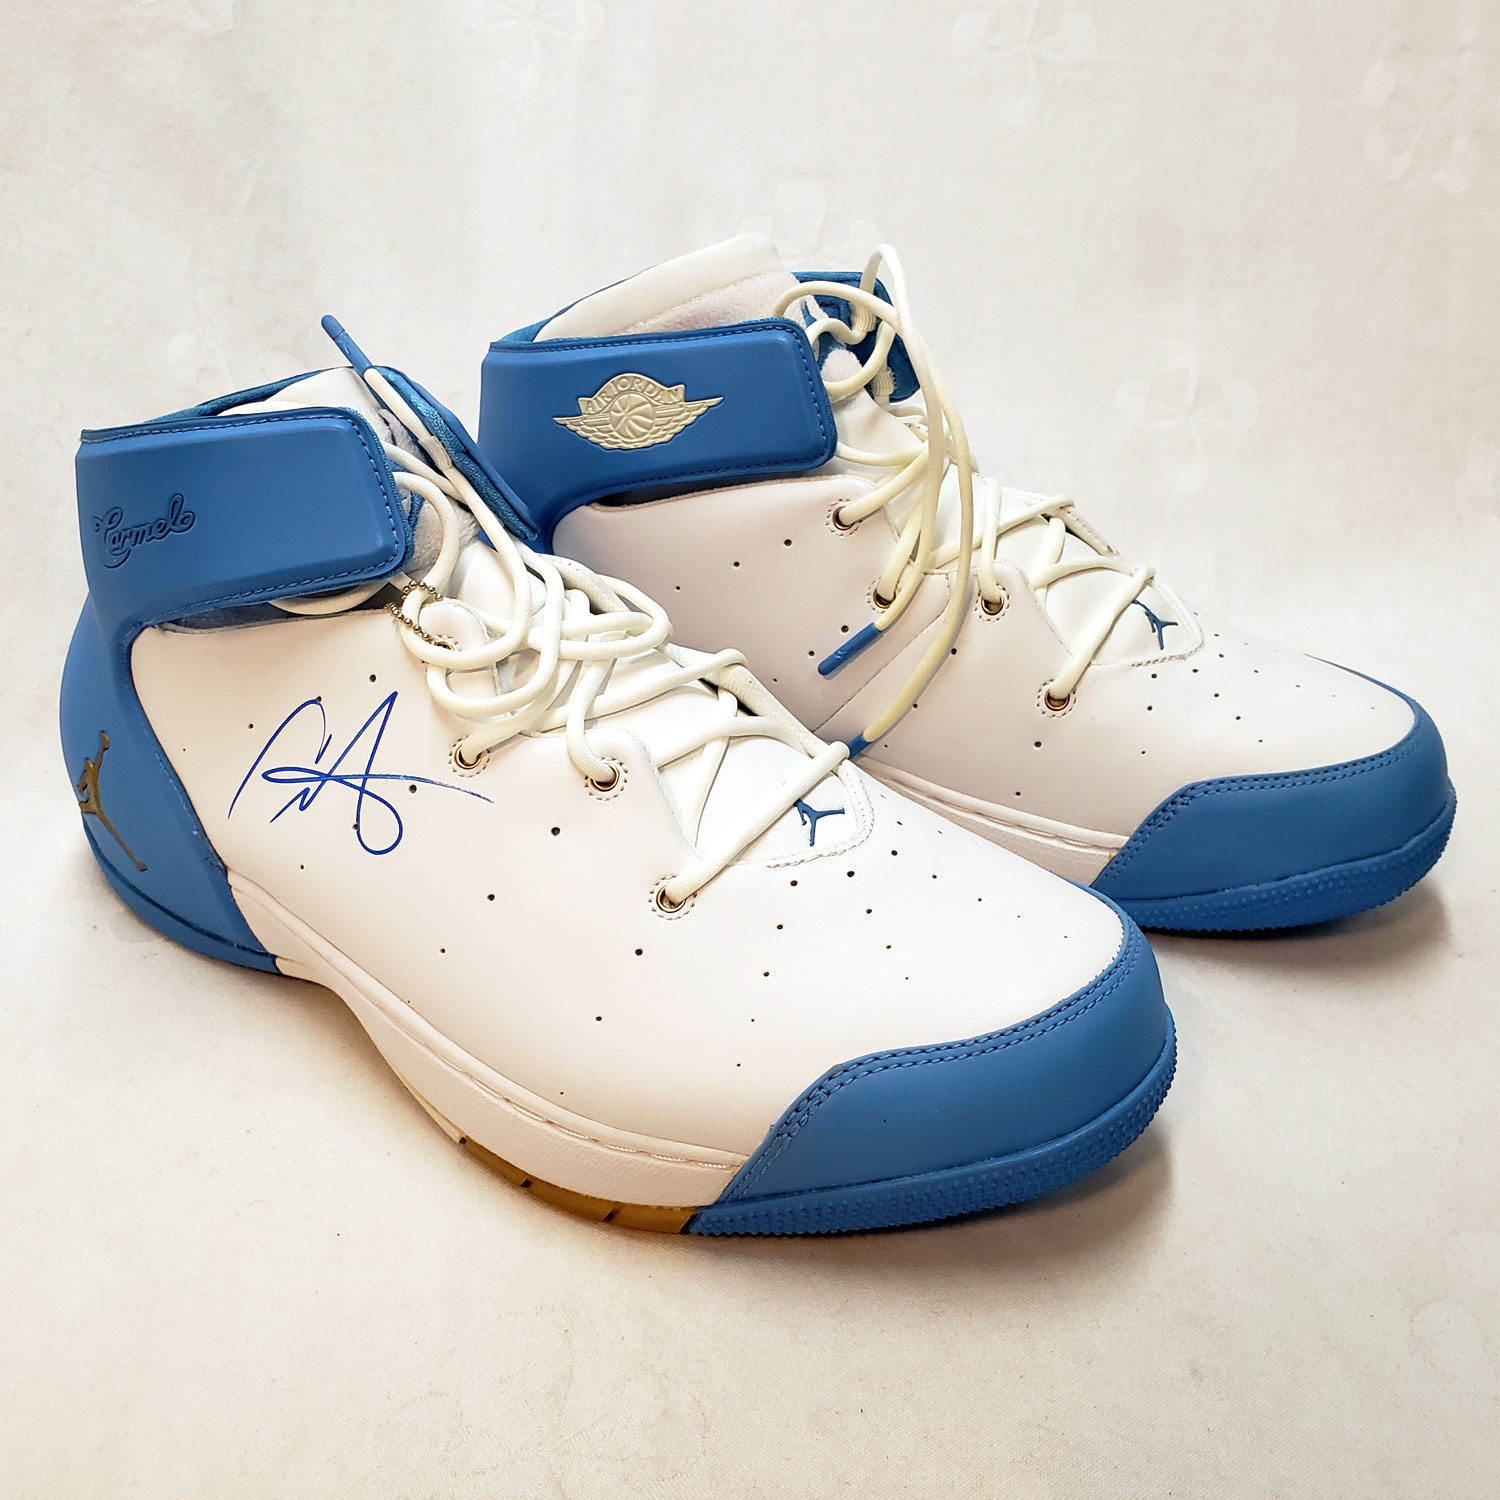 Carmelo Anthony Sneakers EMC1003 A 